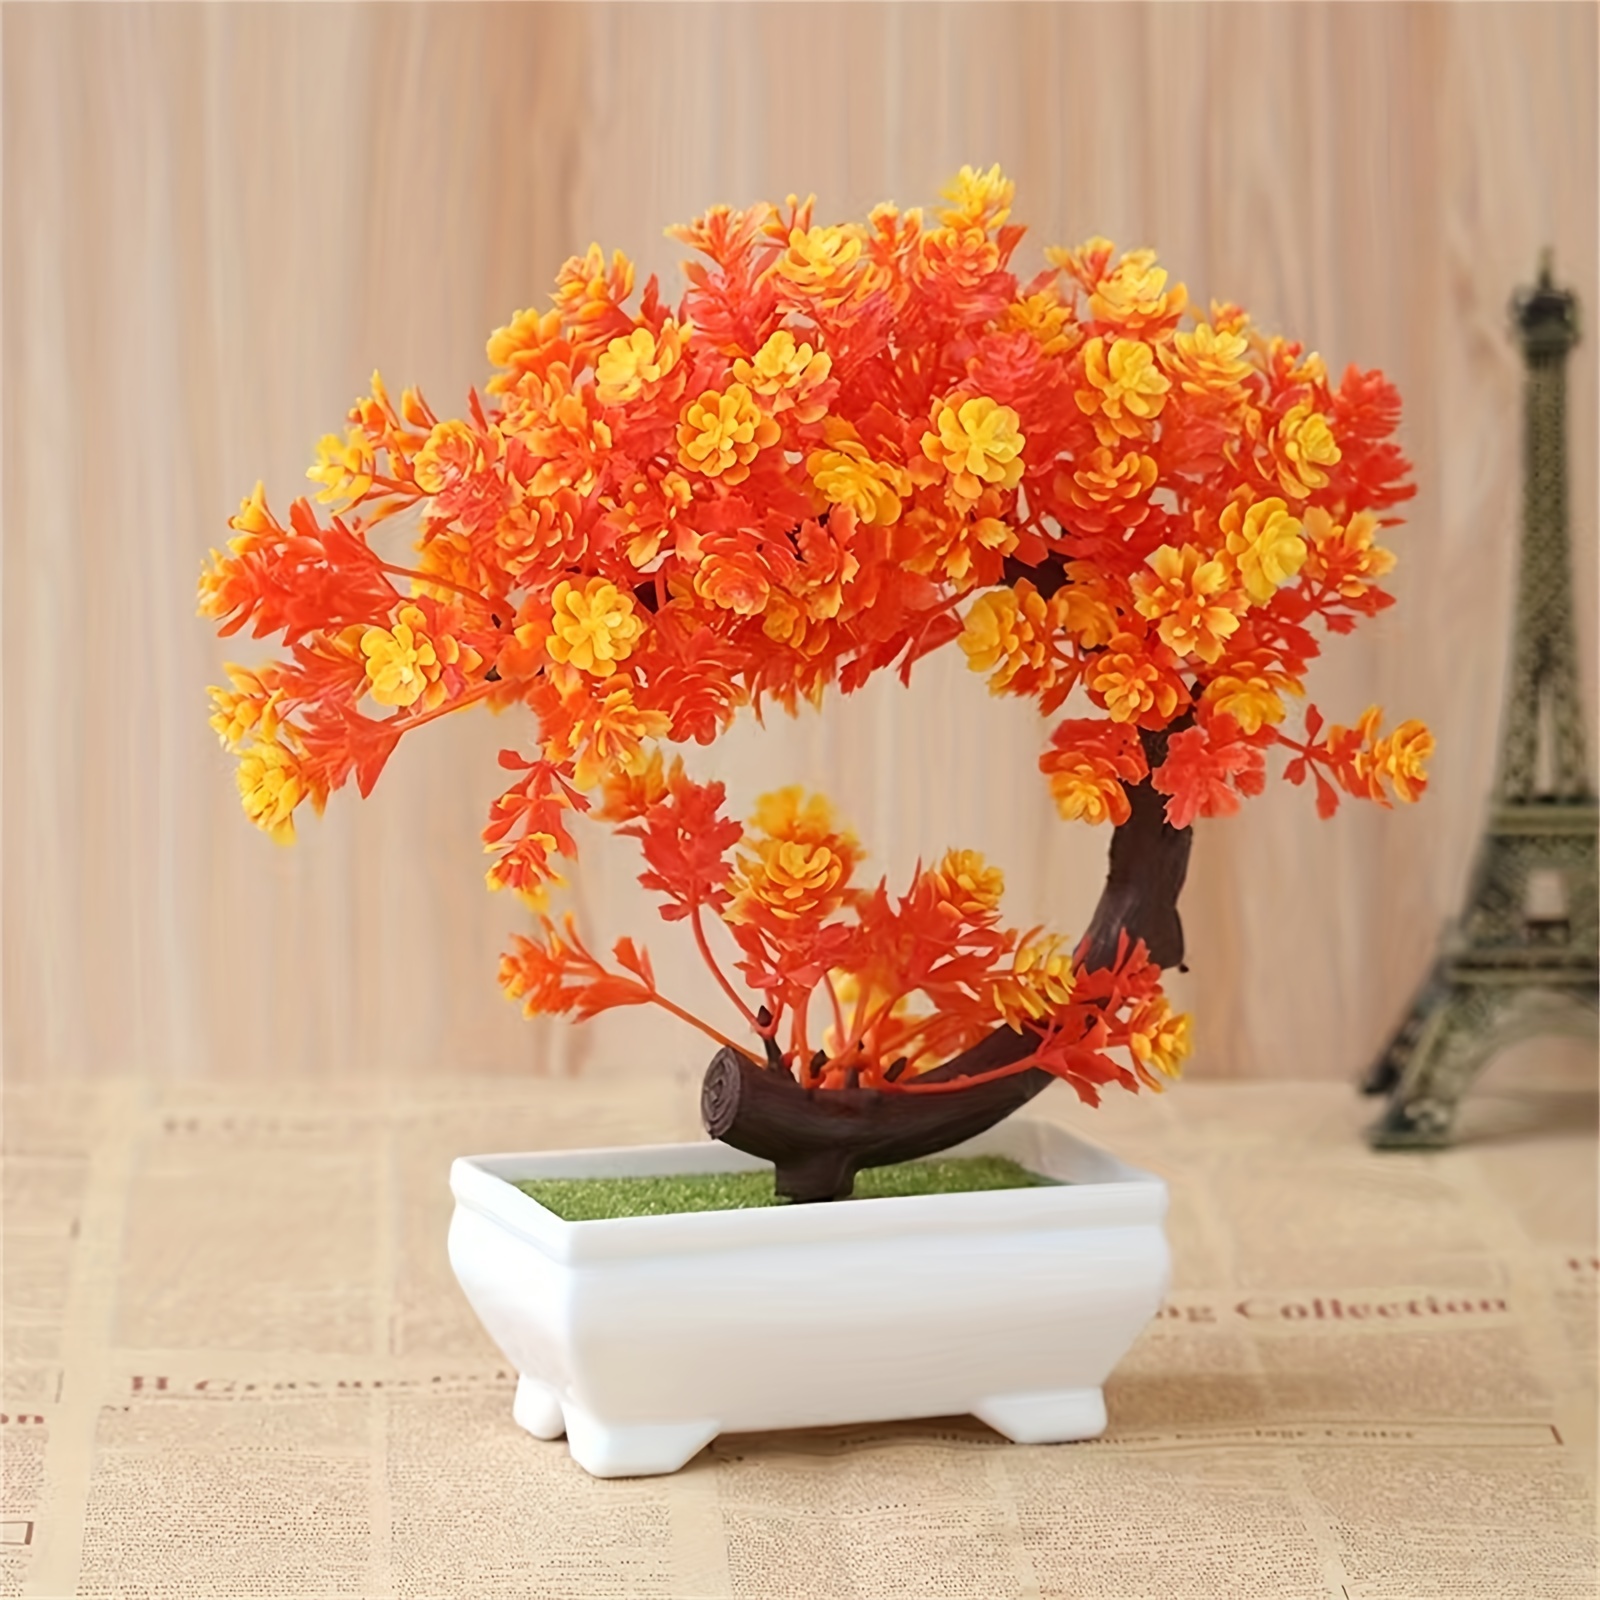 

1pc, Artificial Potted Plant, Plastic Simulation Bonsai Tree Look Flower Ornament, For Home Room Garden Decor, Faux Flowers, Garden Stuff, Living Room Decoration, Holiday Decorations